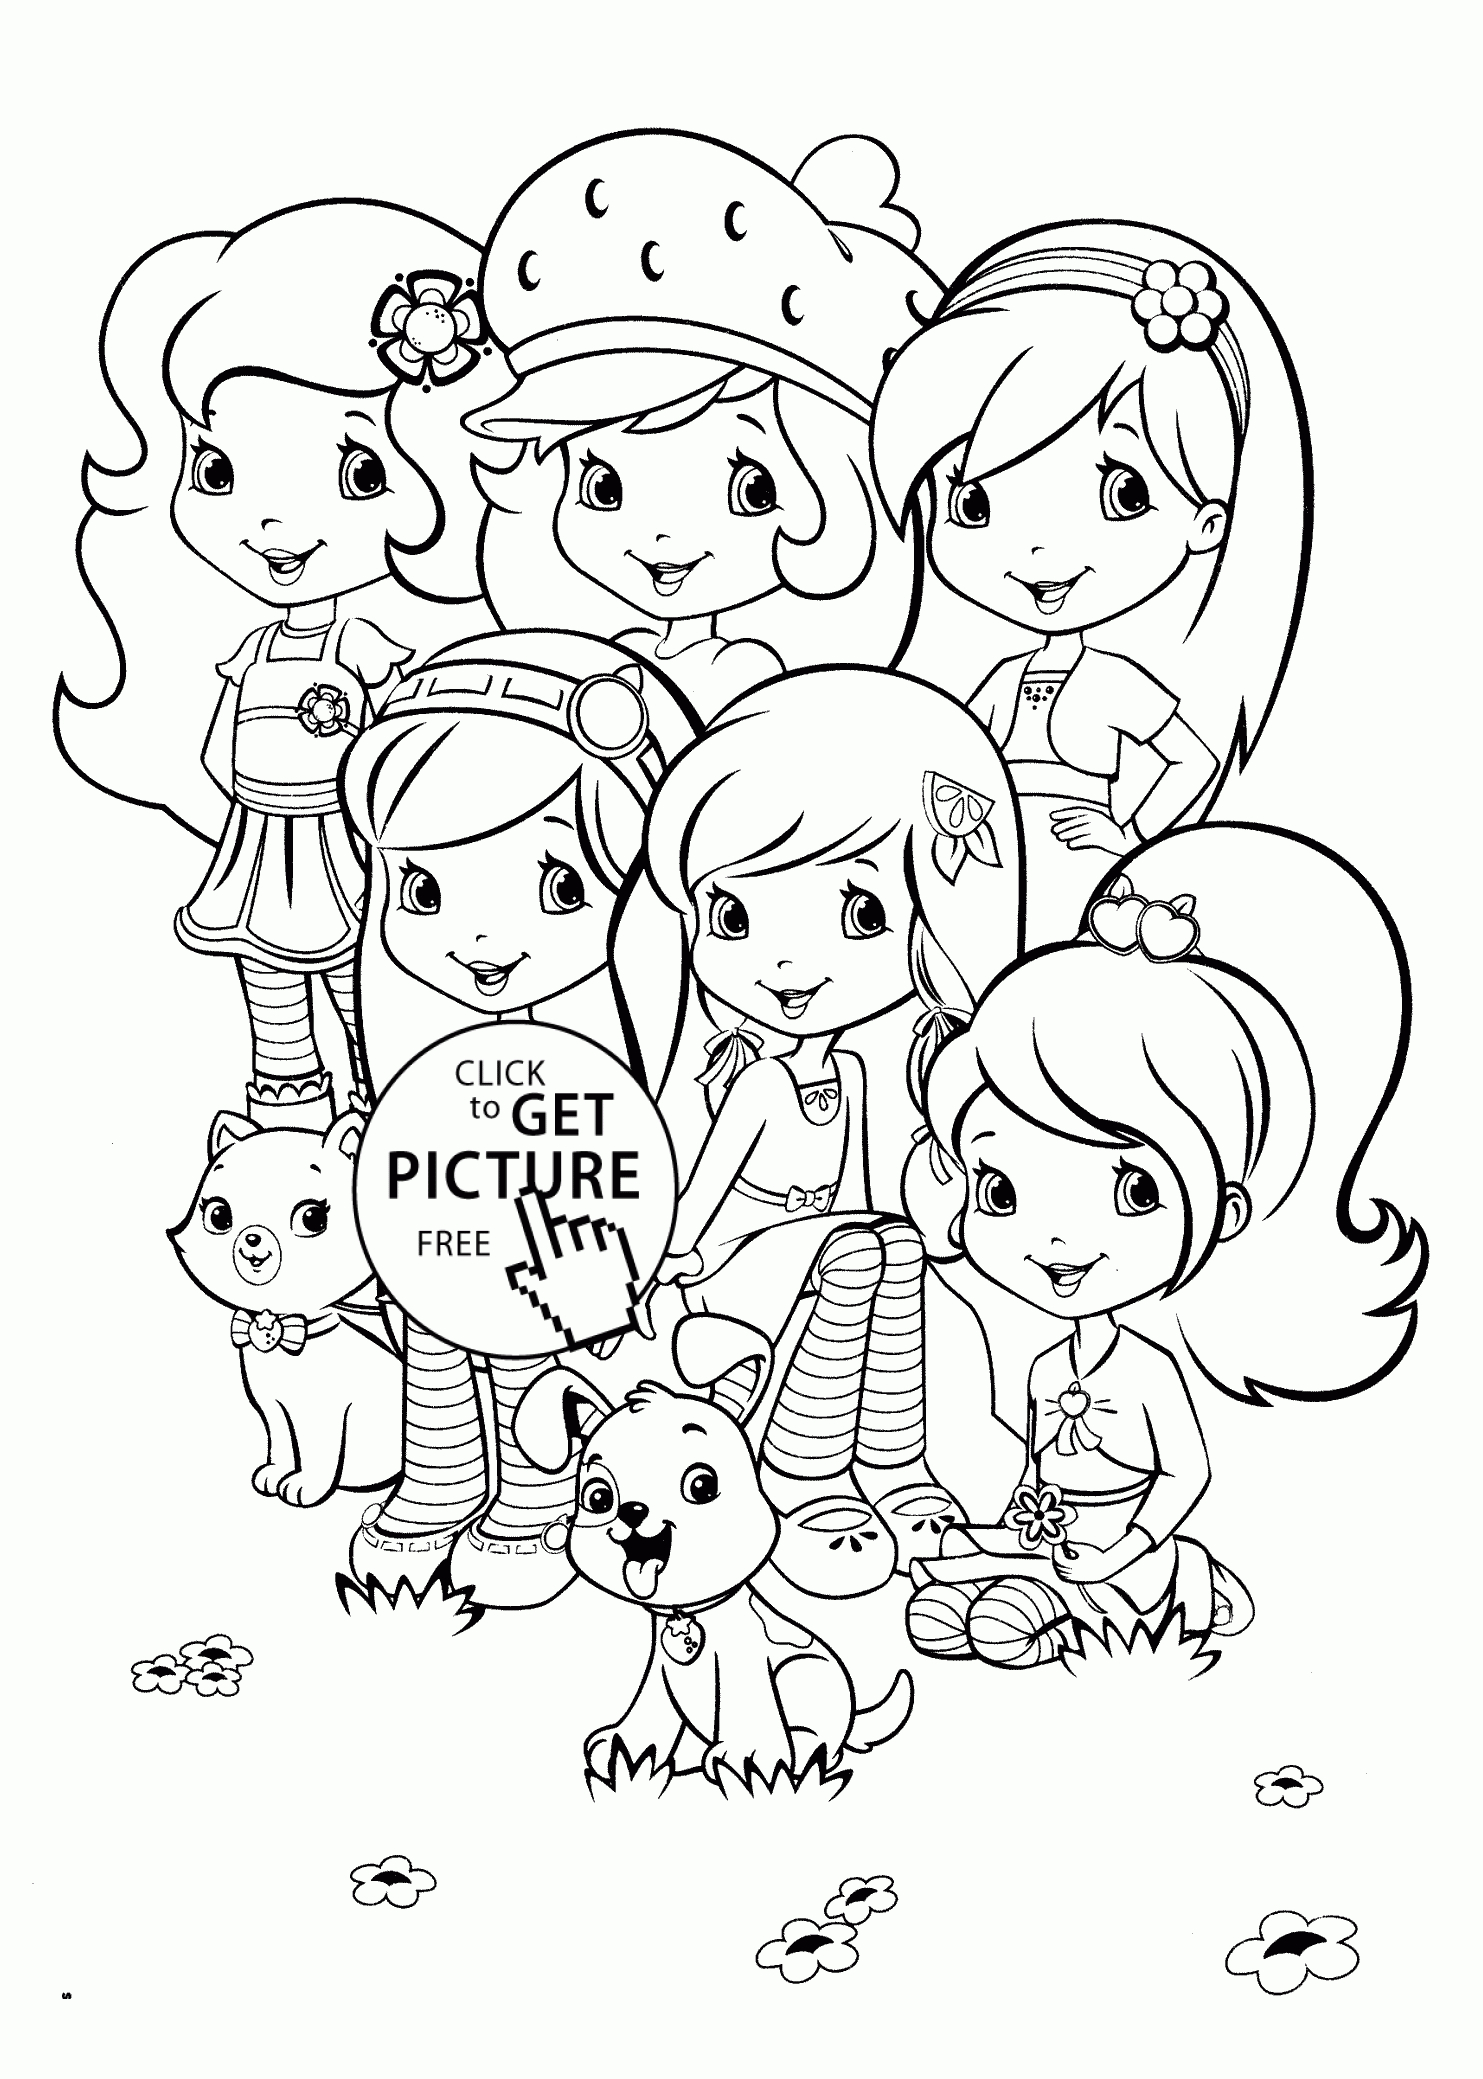 Strawberry Shortcake Coloring Pages Free Printable - Free Printable